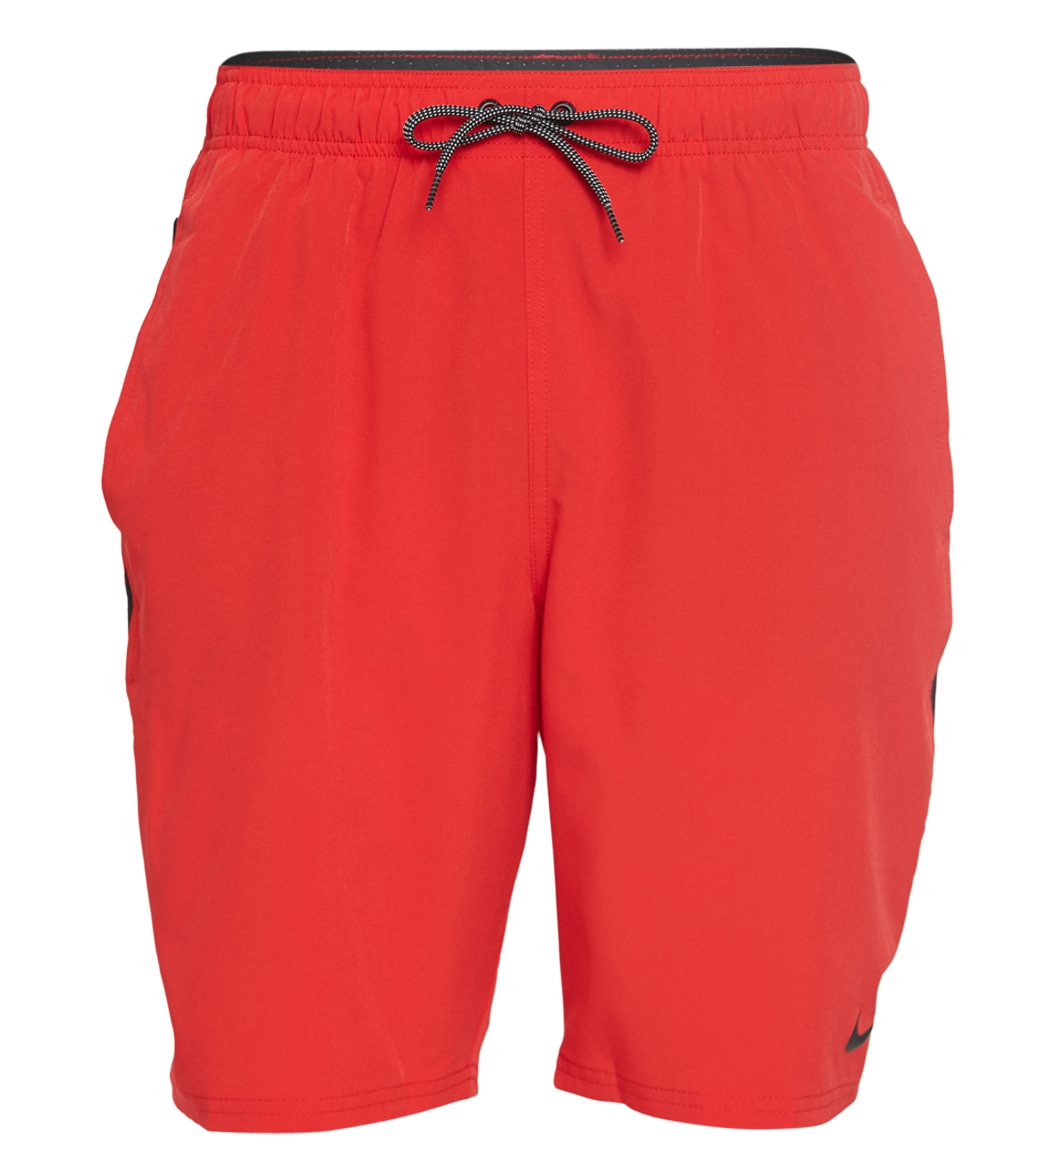 Nike Men's 20 Contend Volley Short - University Red Medium Polyester - Swimoutlet.com